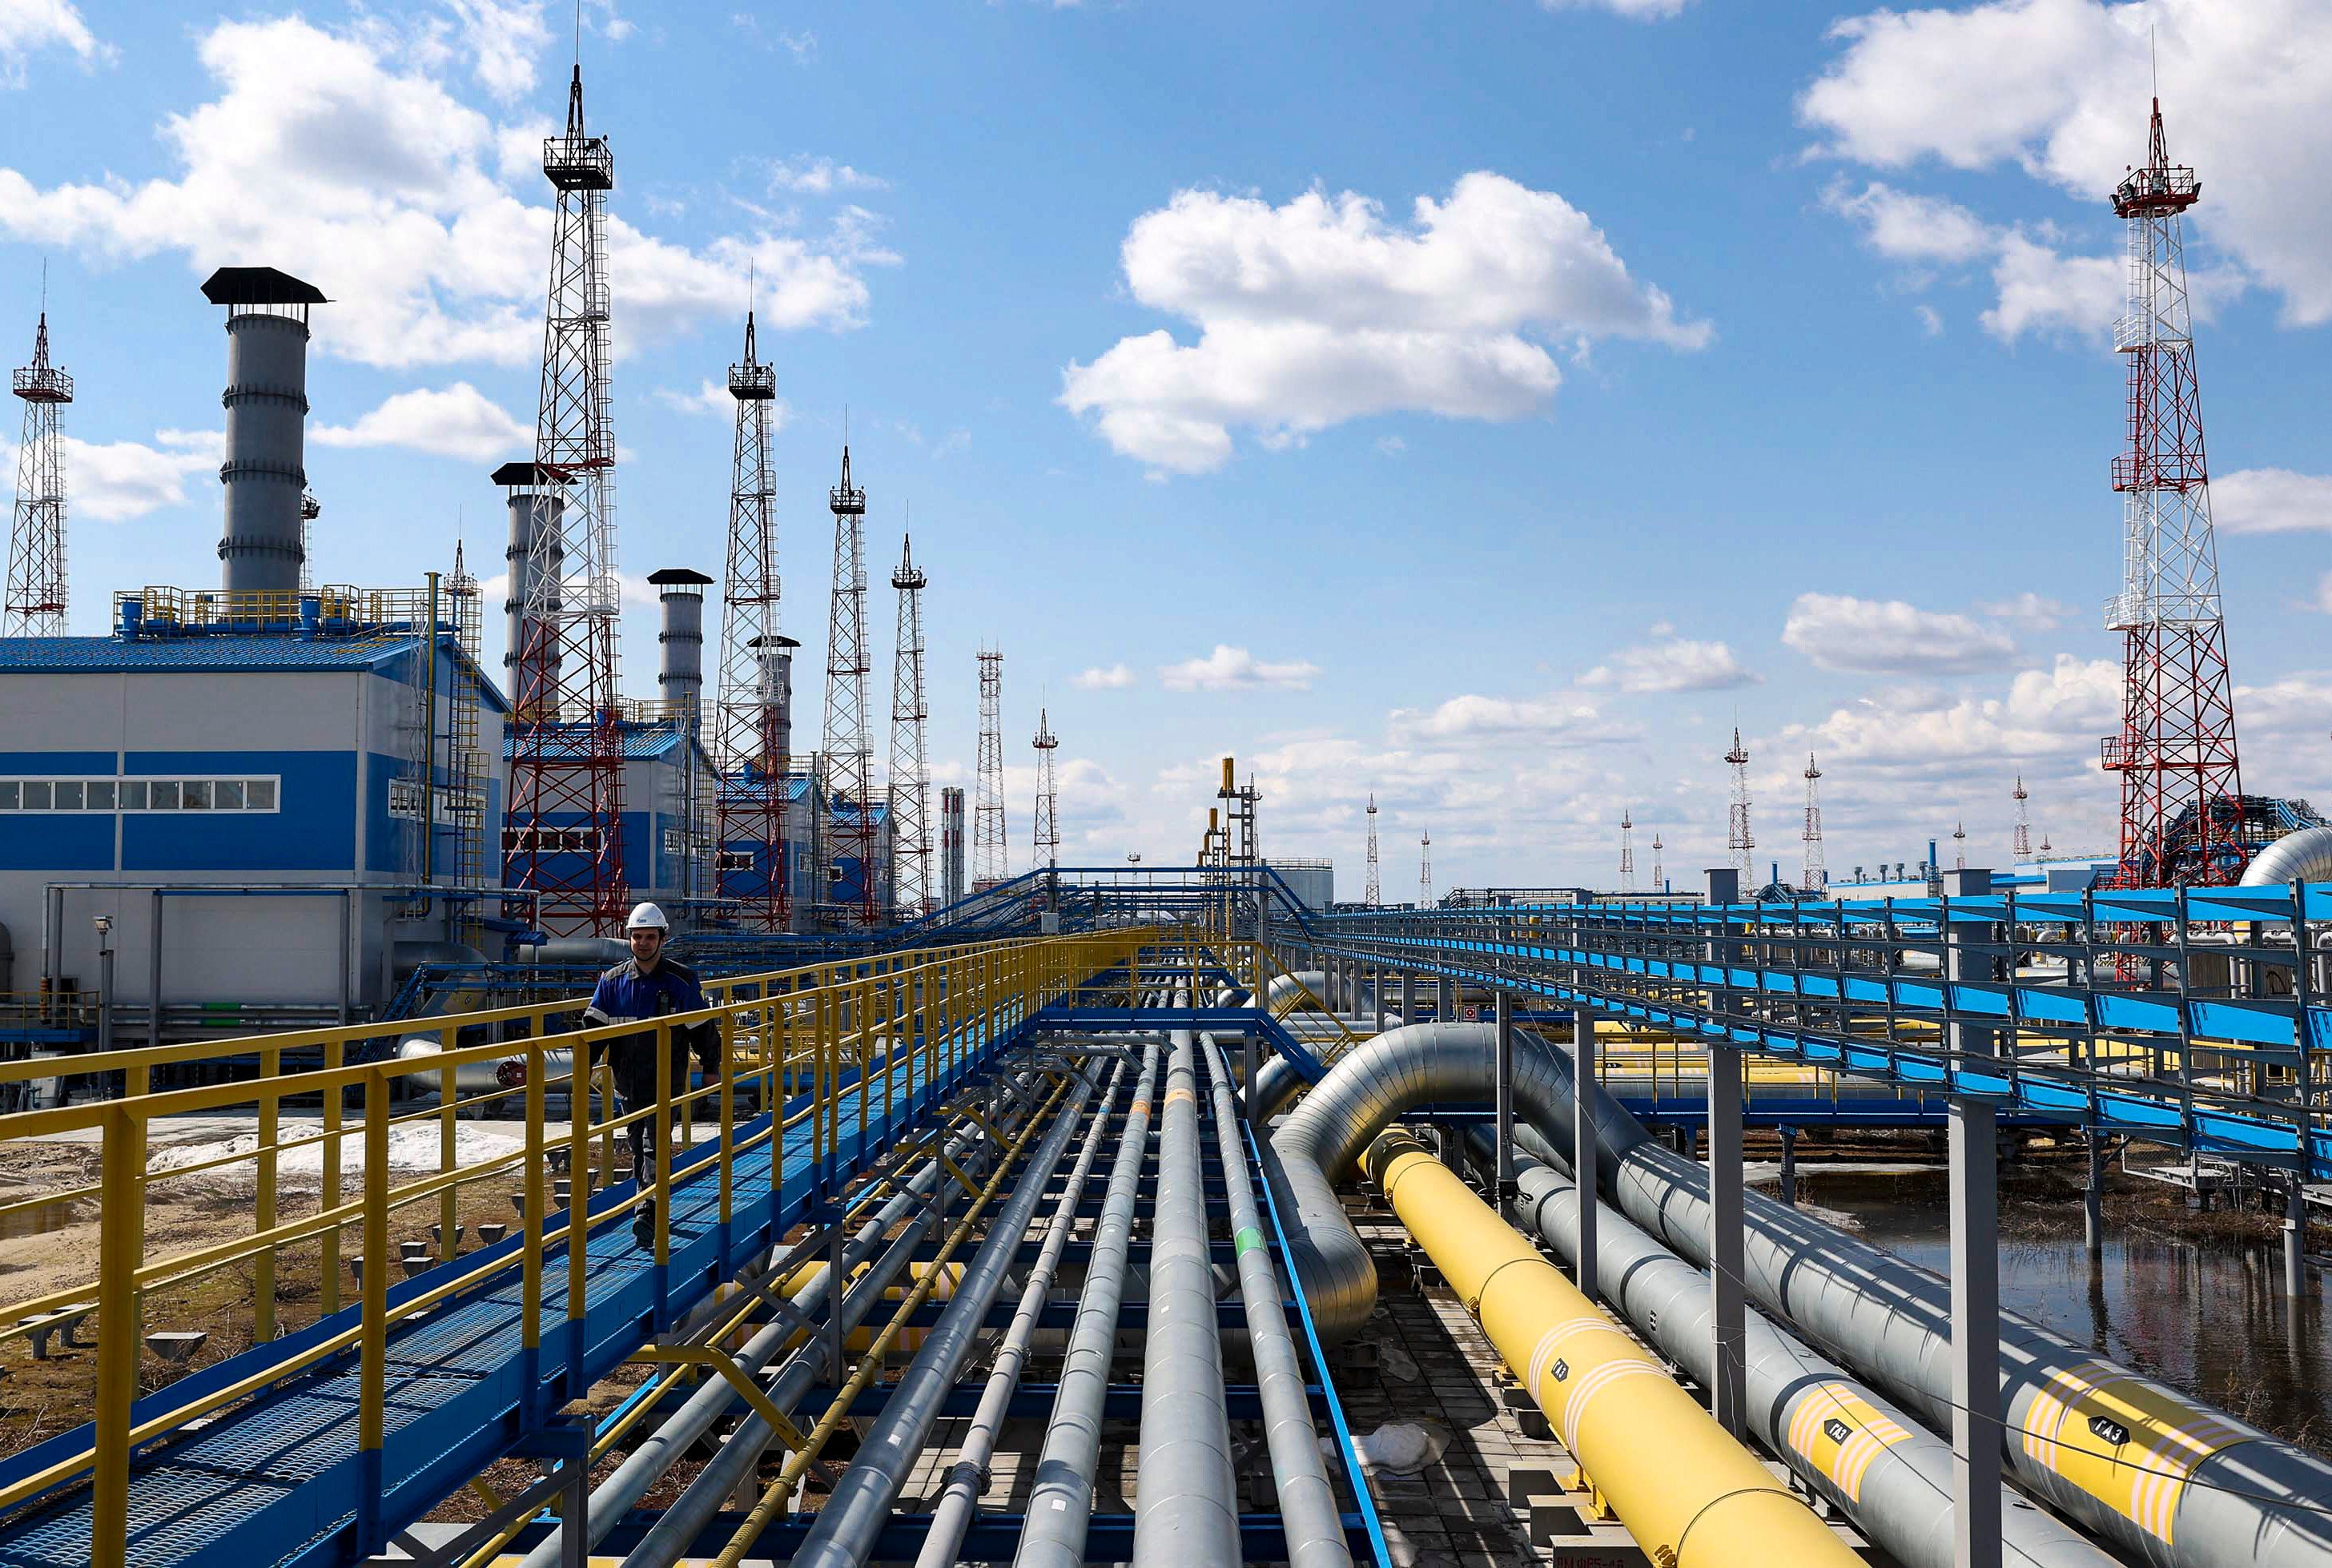 The Power of Siberia pipeline supplies gas from Russia to China. Photo: TNS